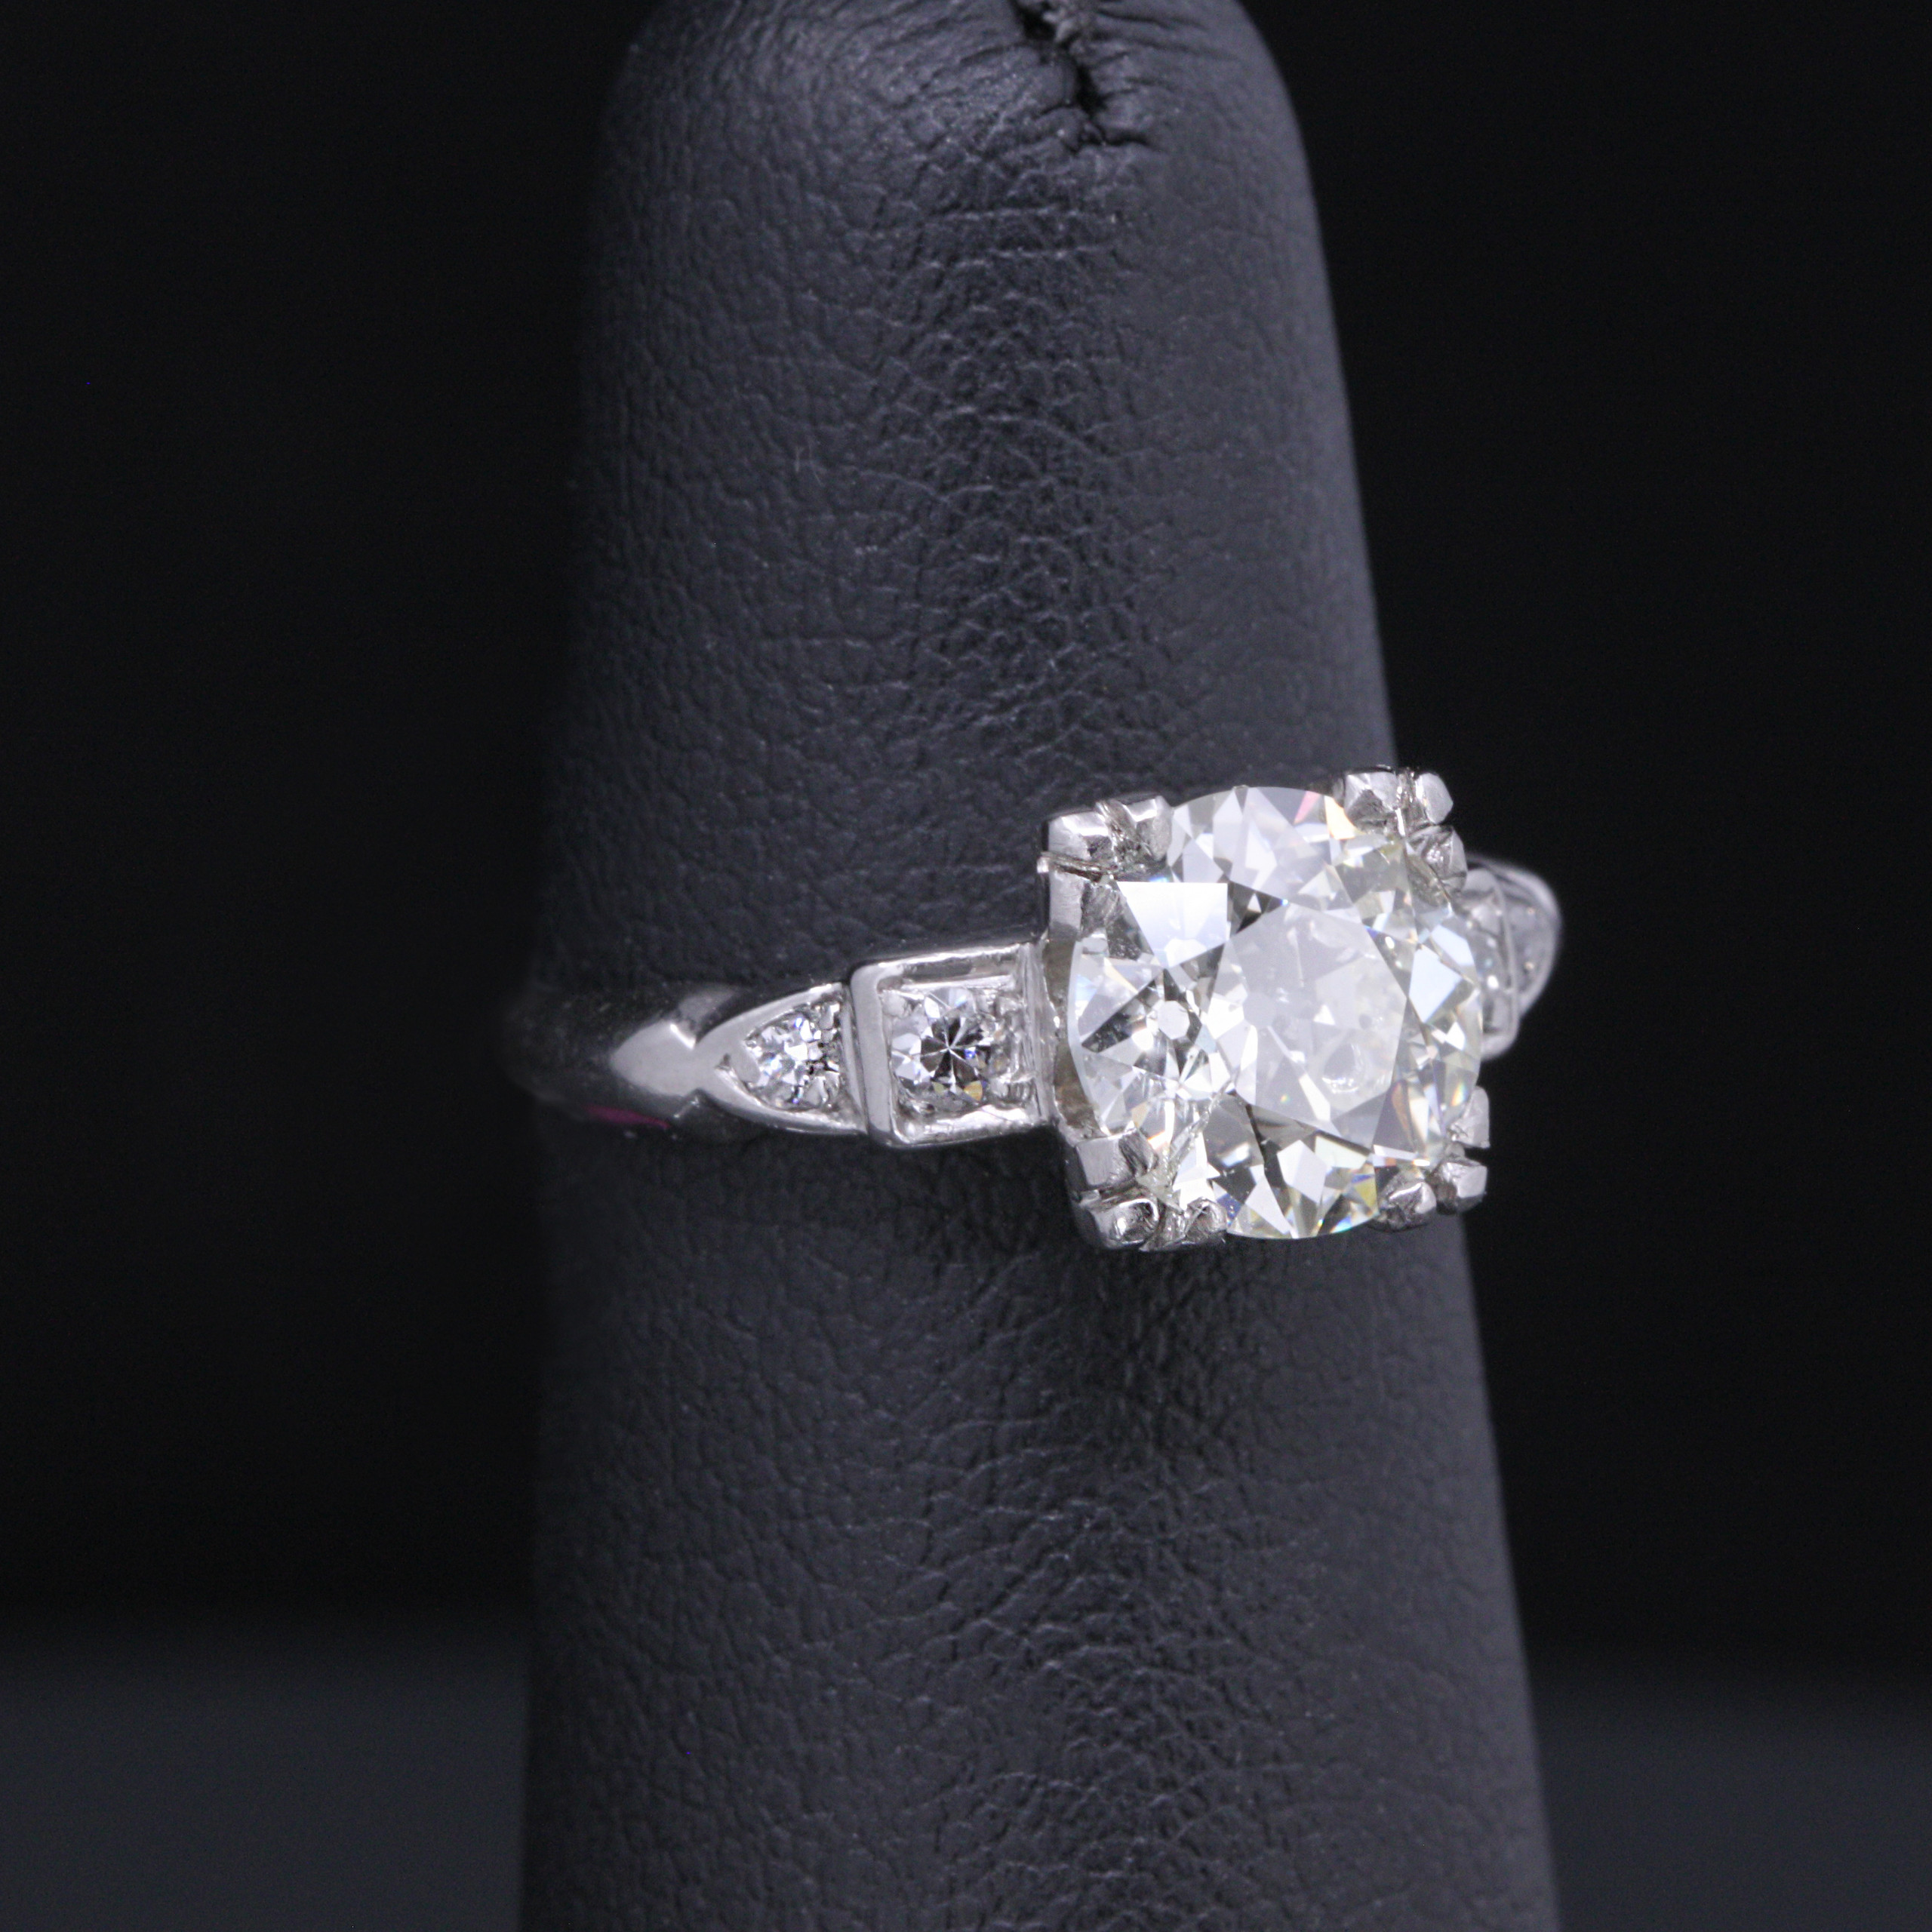 Vintage Diamond Engagement Rings - Spectacular Antique and Estate ...